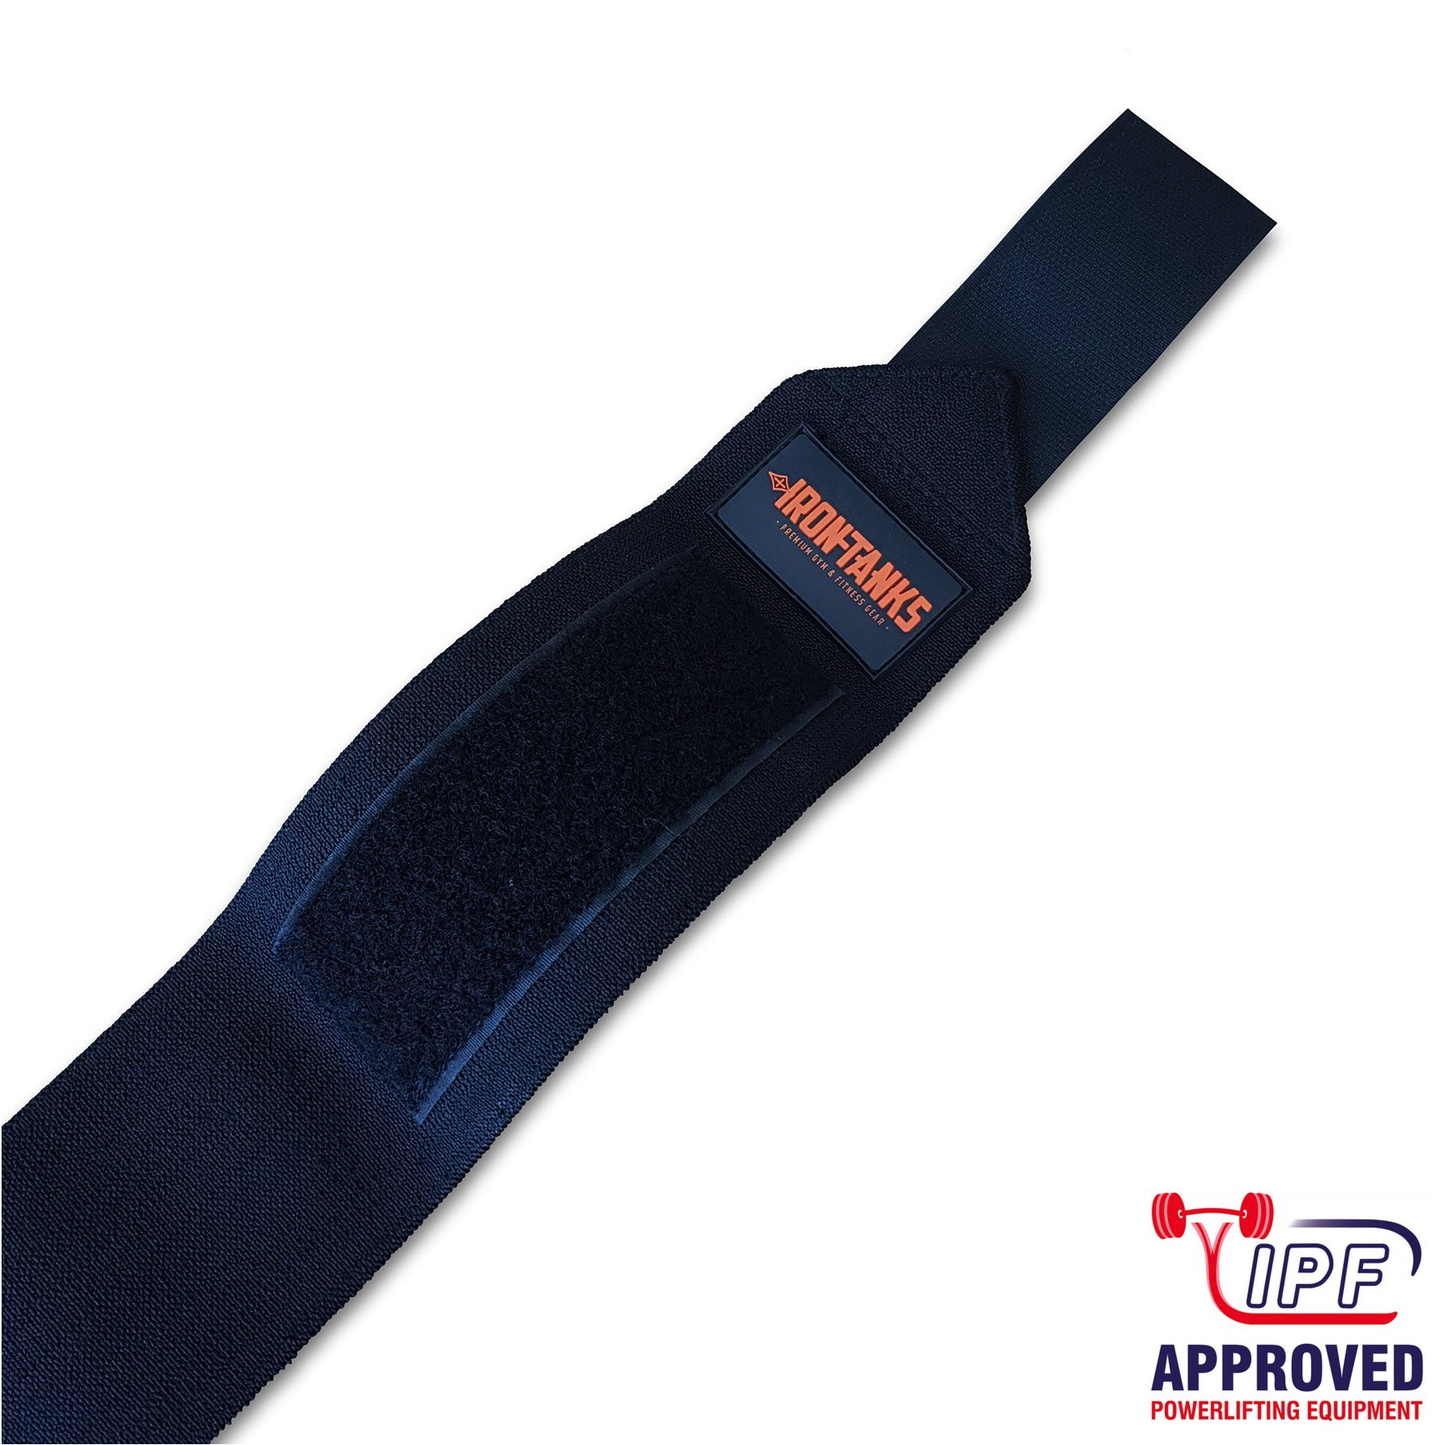 Iron Tanks Ironclad Wrist Wraps (Immortal Black) - IPF APPROVED - 9 for 9